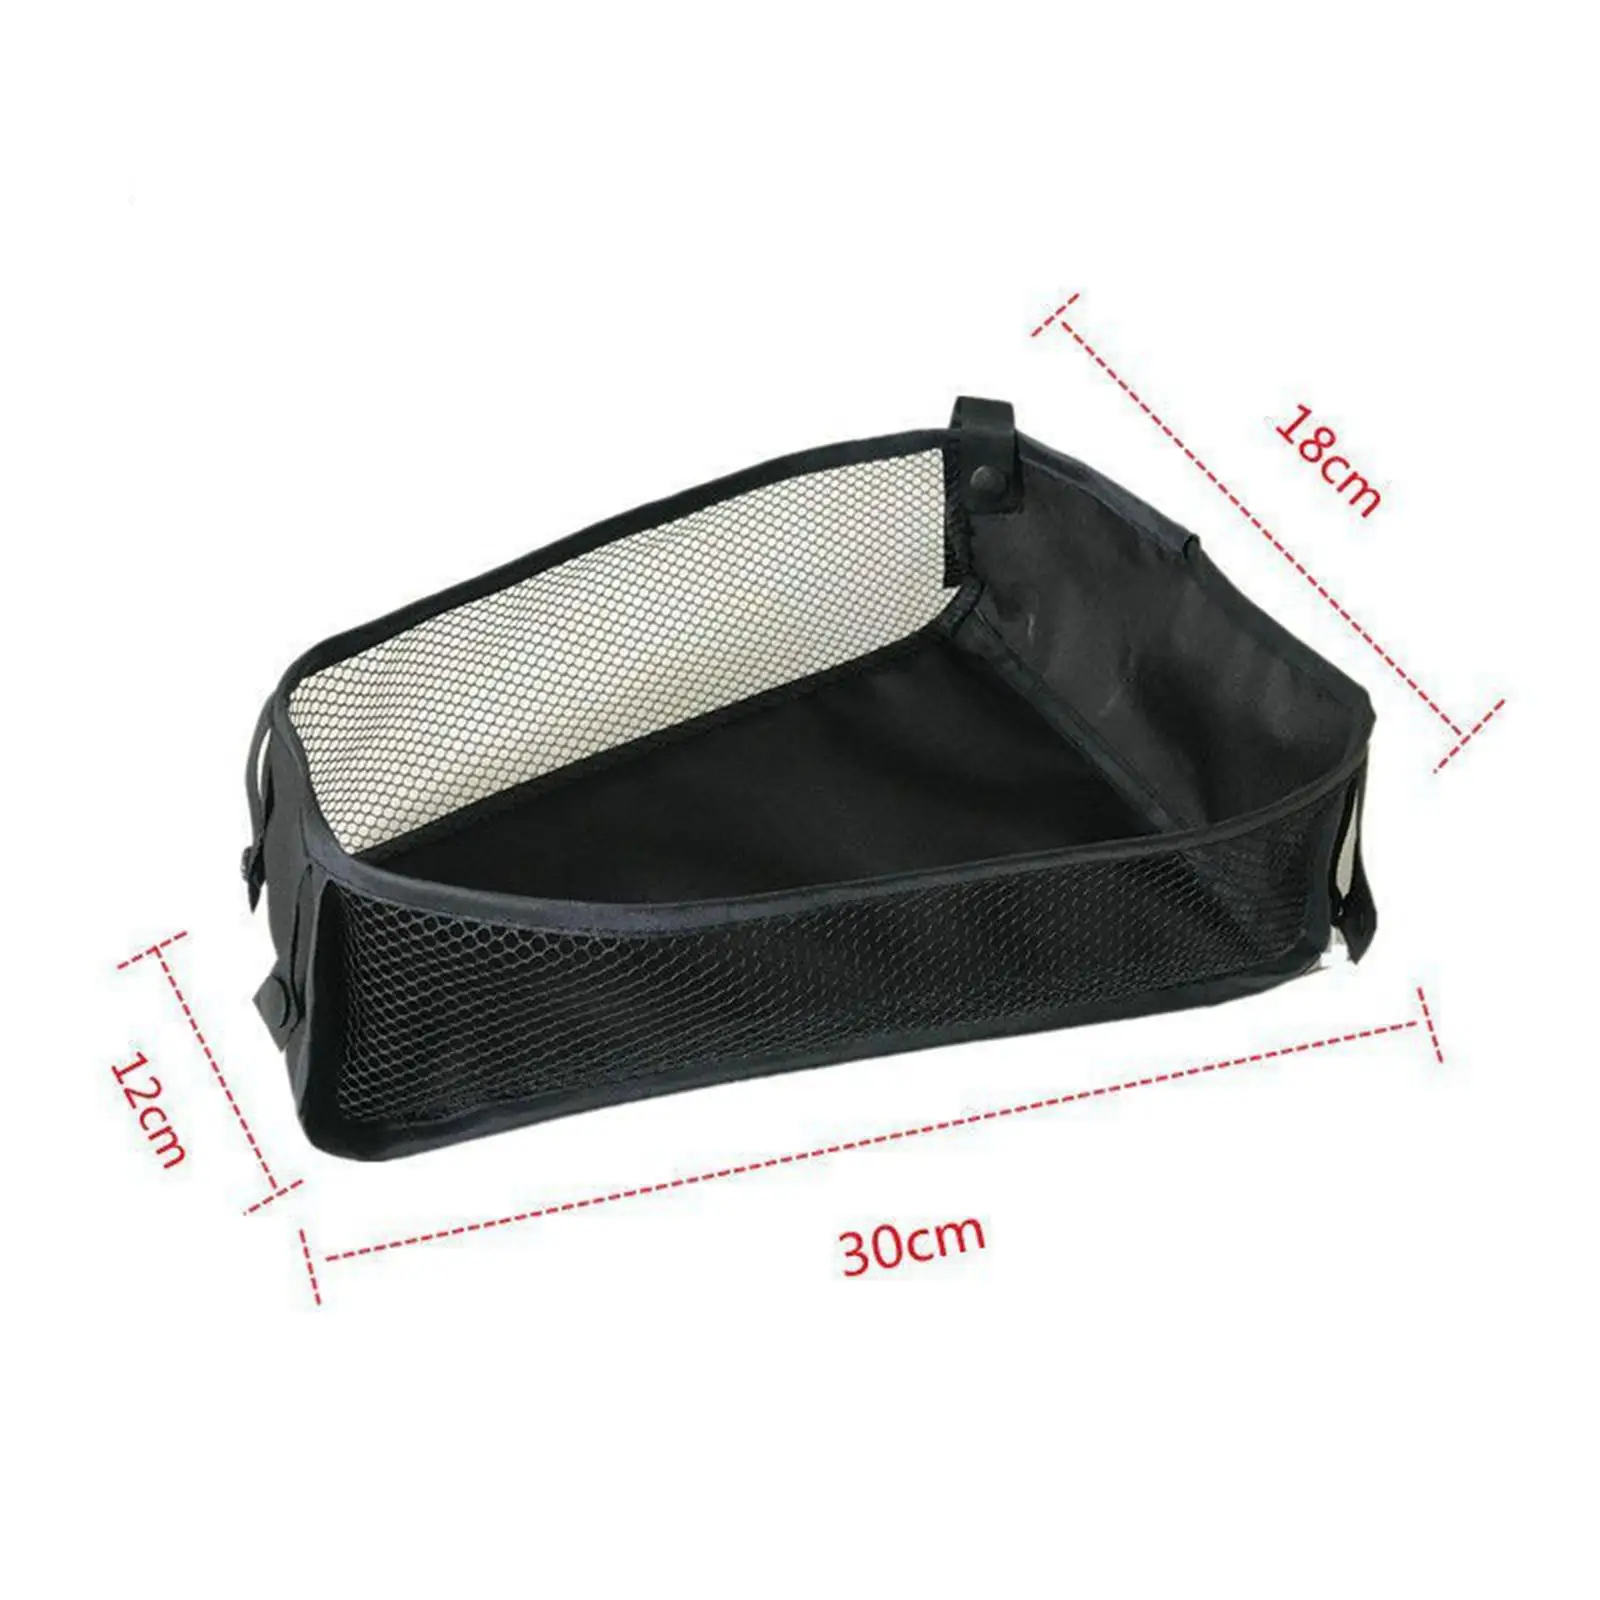 Baby Stroller Bag with Board Pram Bottom Basket Underseat Tray for Feeding Bottles Clothes Carrying Diaper Sundries Bottle